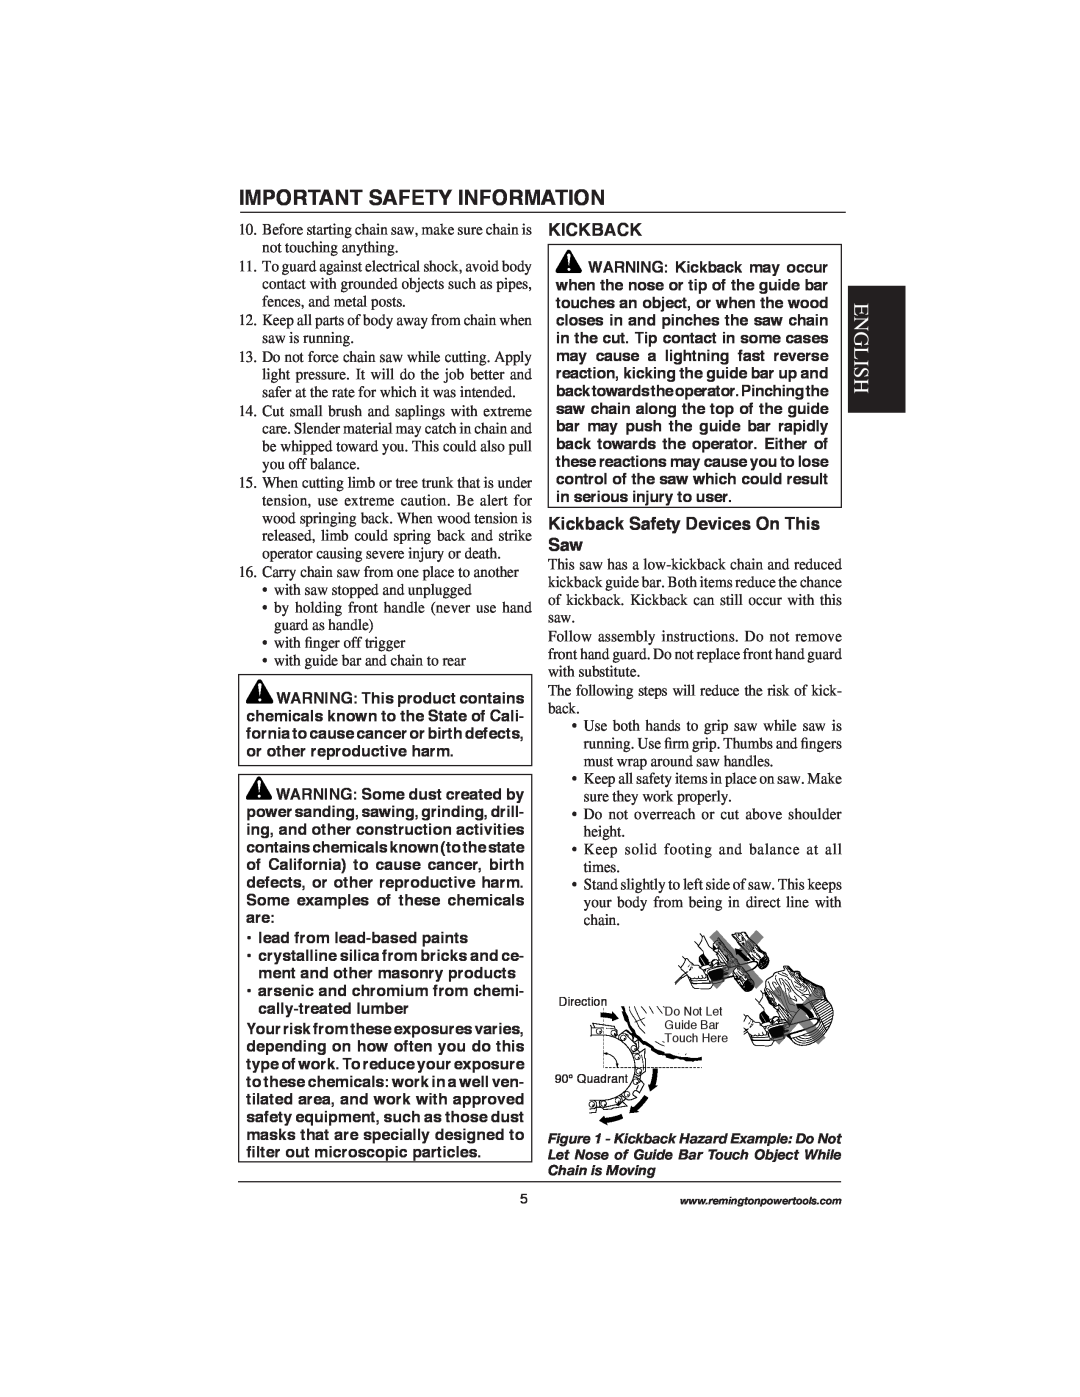 Remington Power Tools M30016AW, M30016AS Kickback Safety Devices On This Saw, Important Safety Information, English 